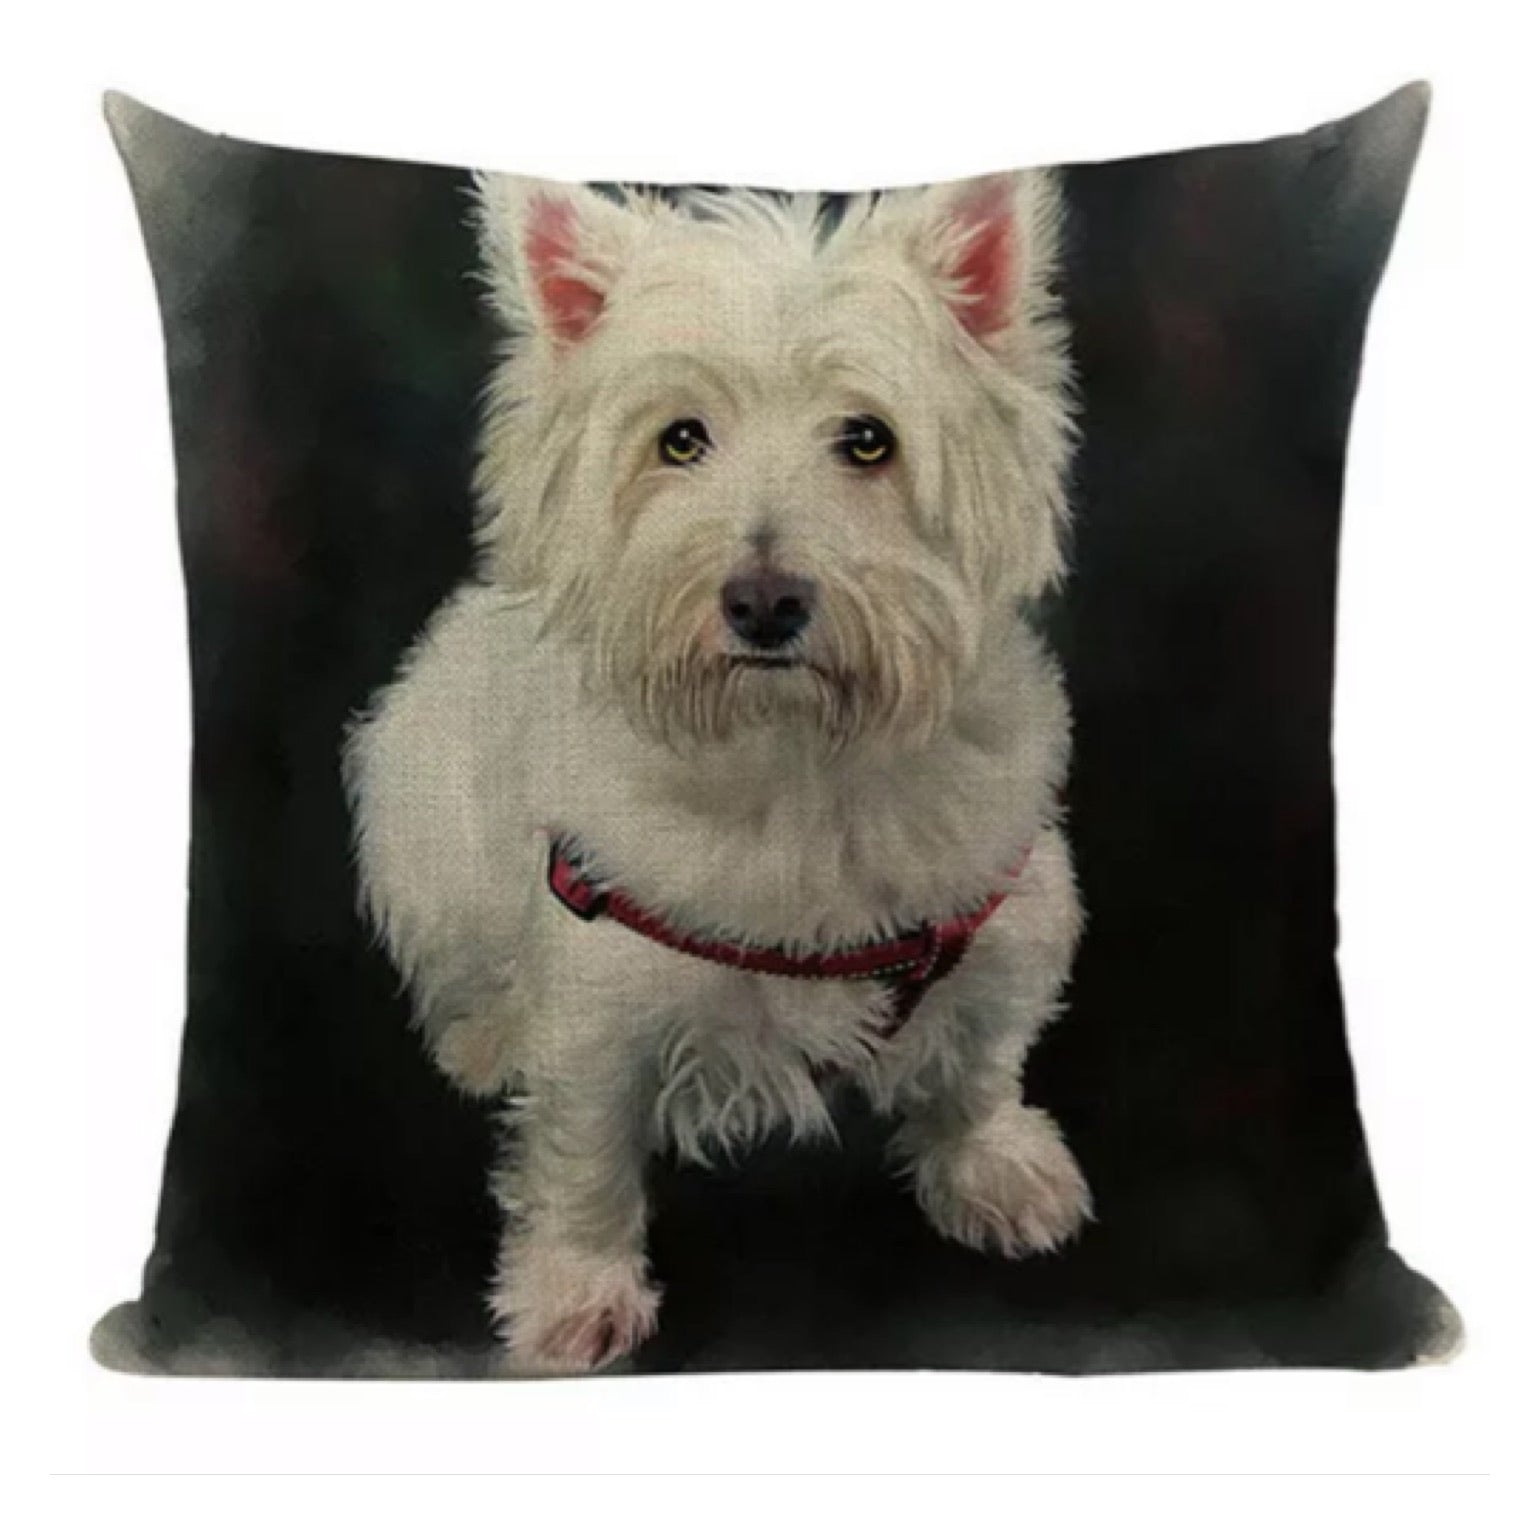 Cushion Pillow Terrier Dog White Peggy - The Renmy Store